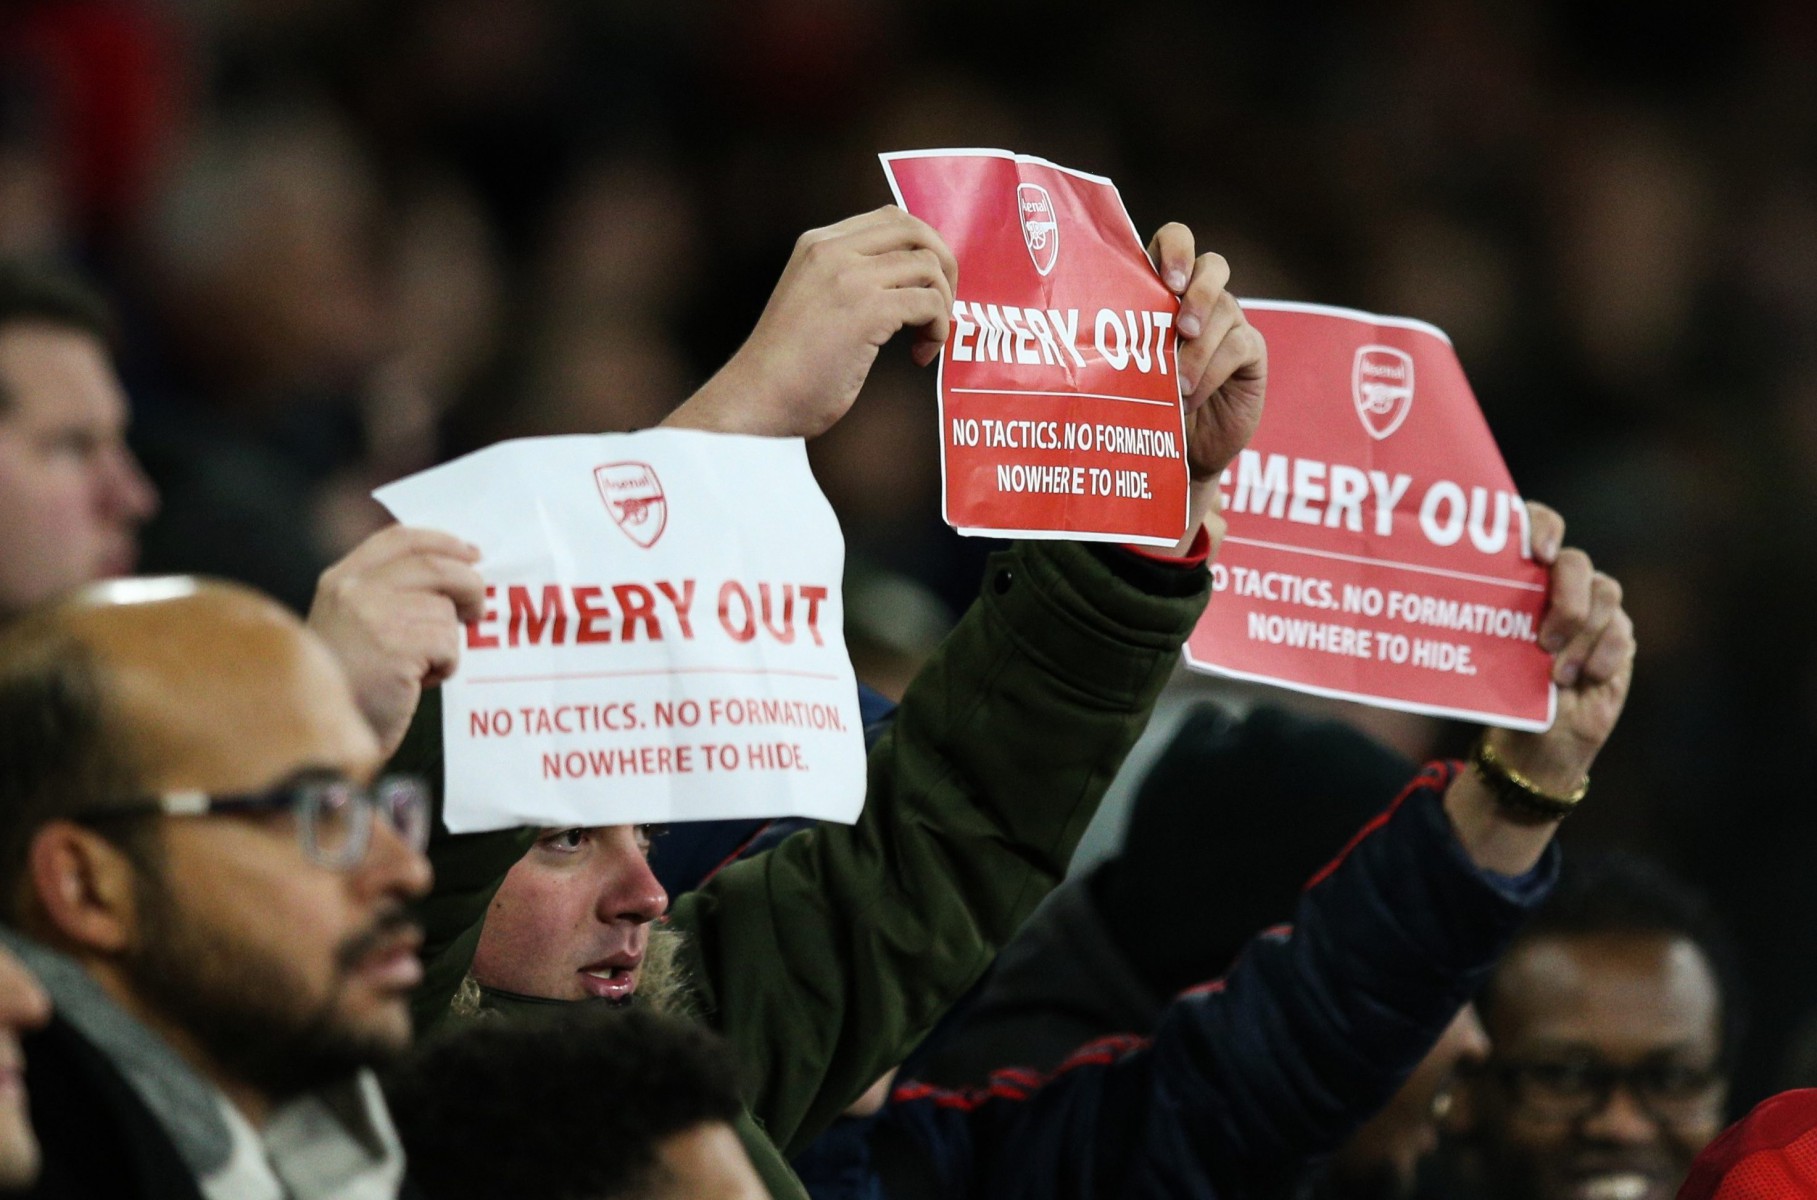 , Bored Arsenal fan plays cards instead of watching humiliating Eintracht Frankfurt loss as Emery gets the sack